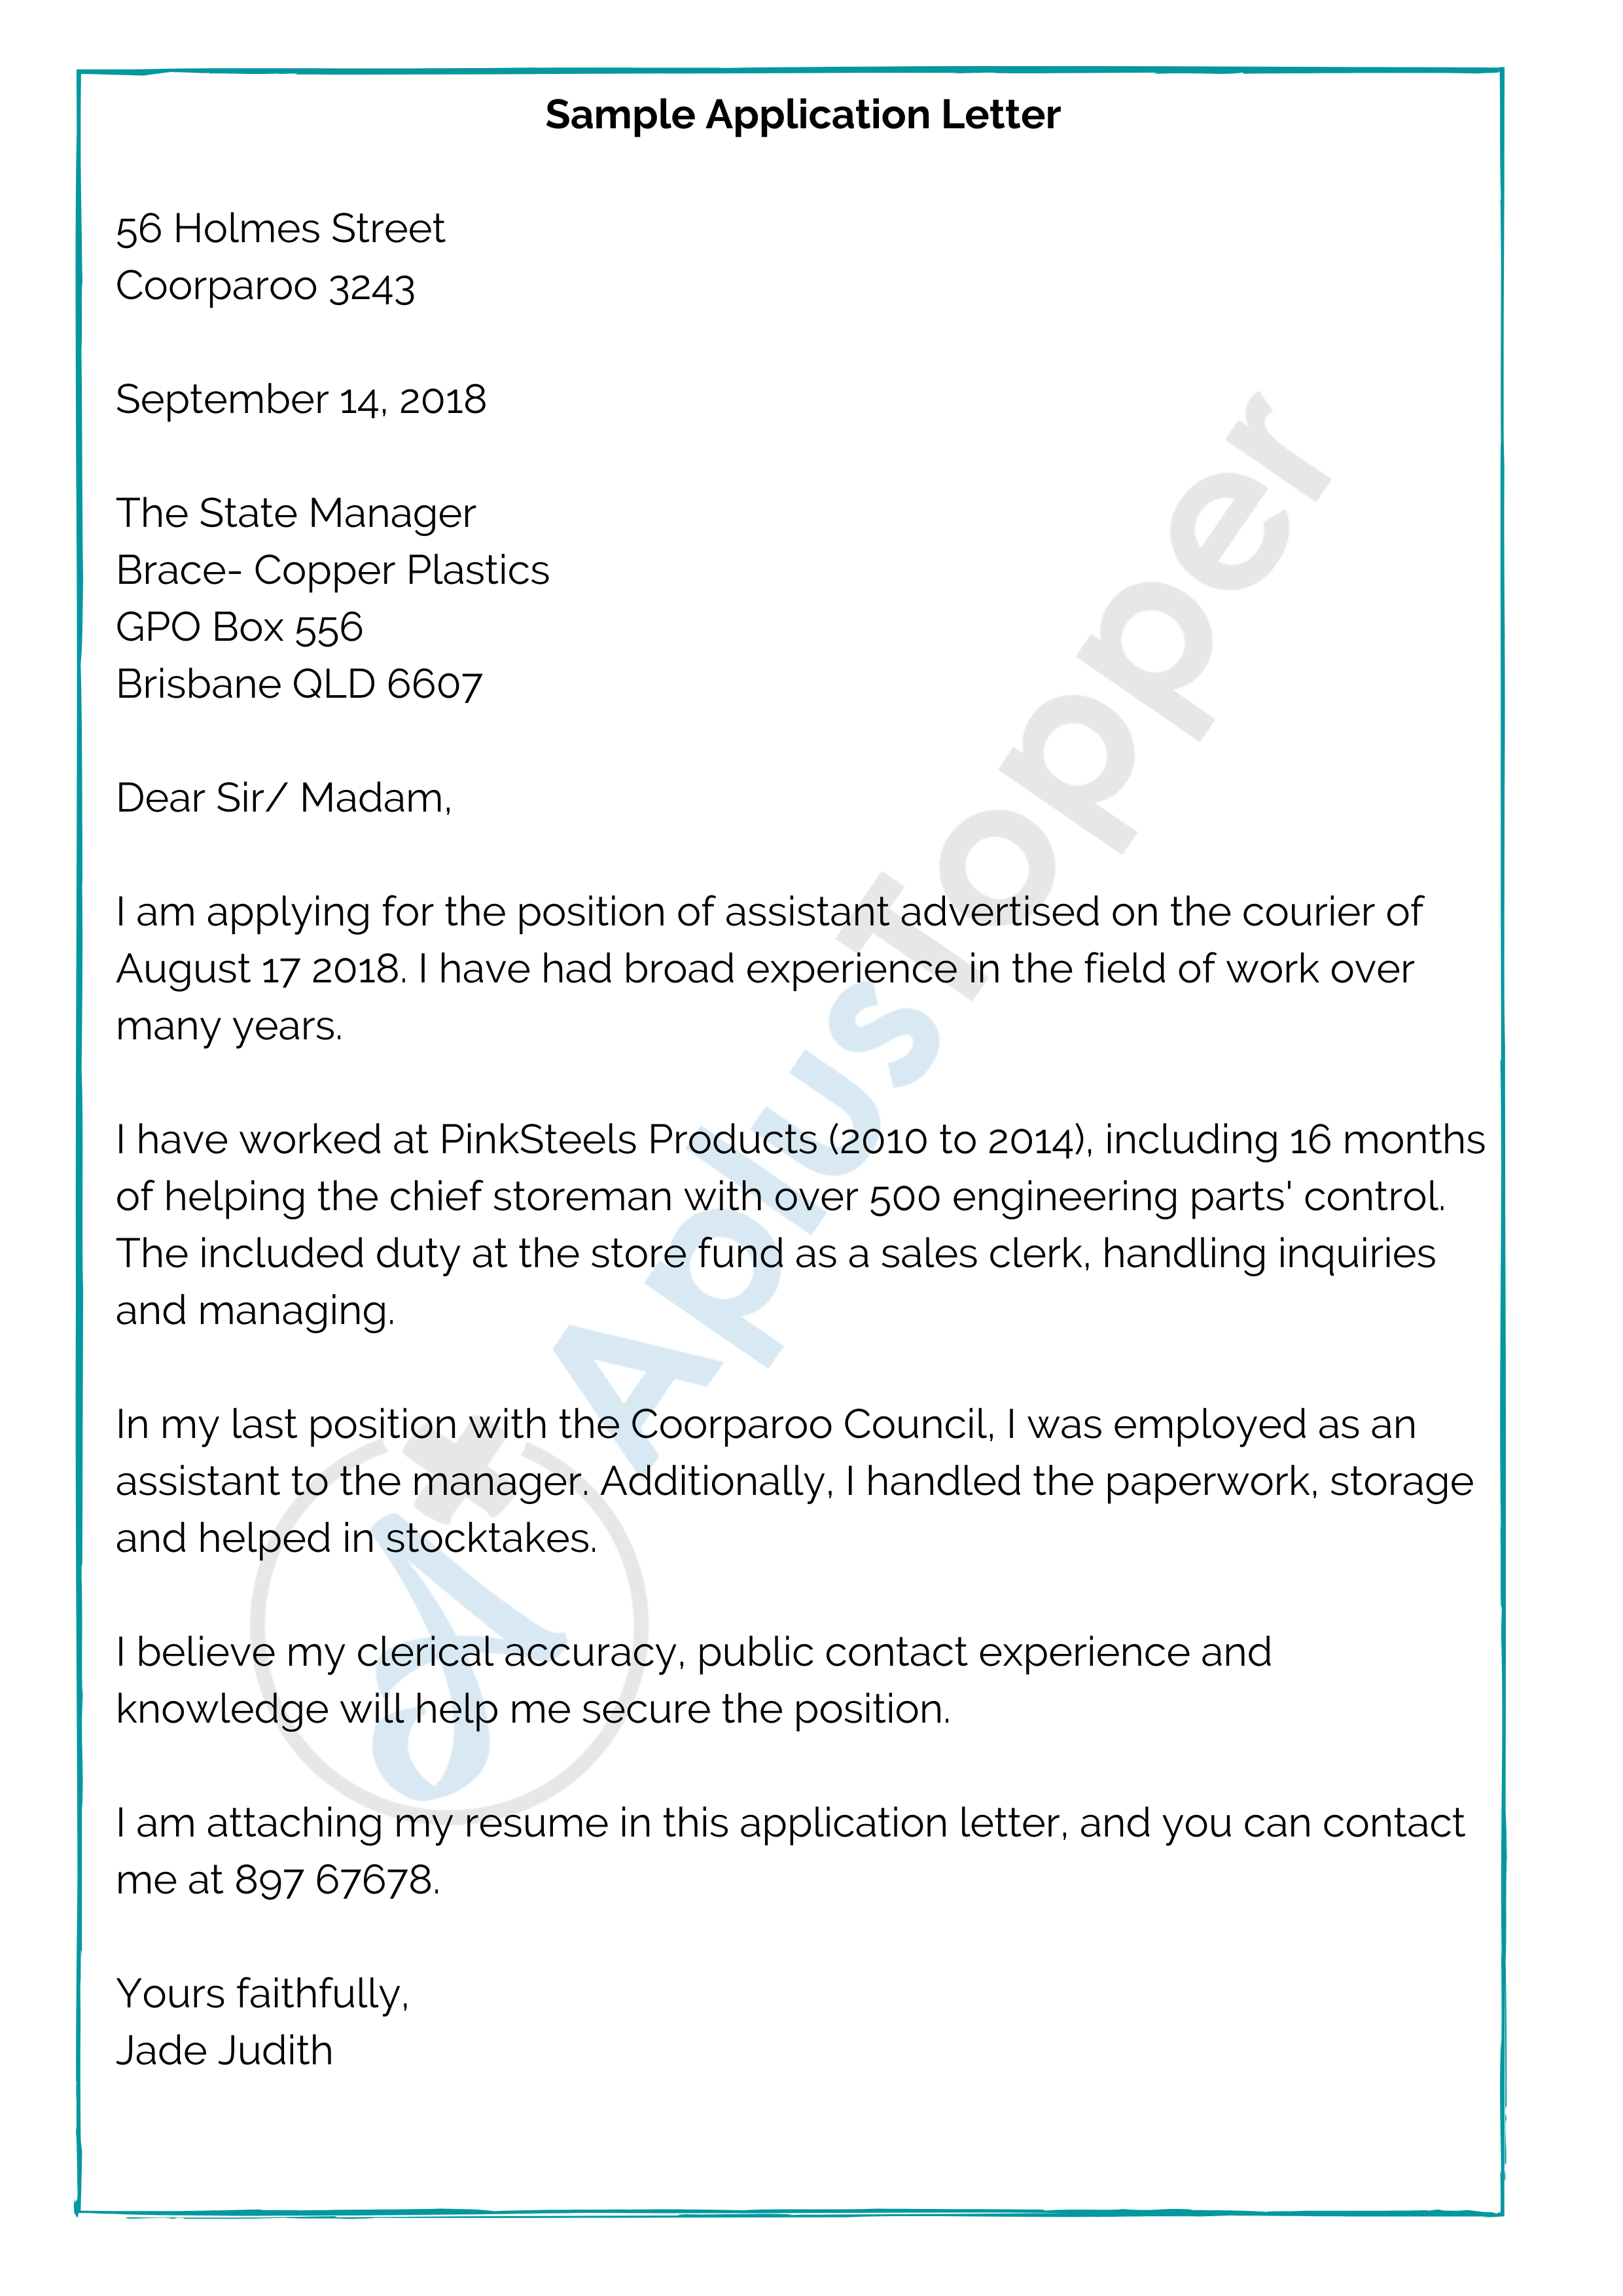 template of application letter